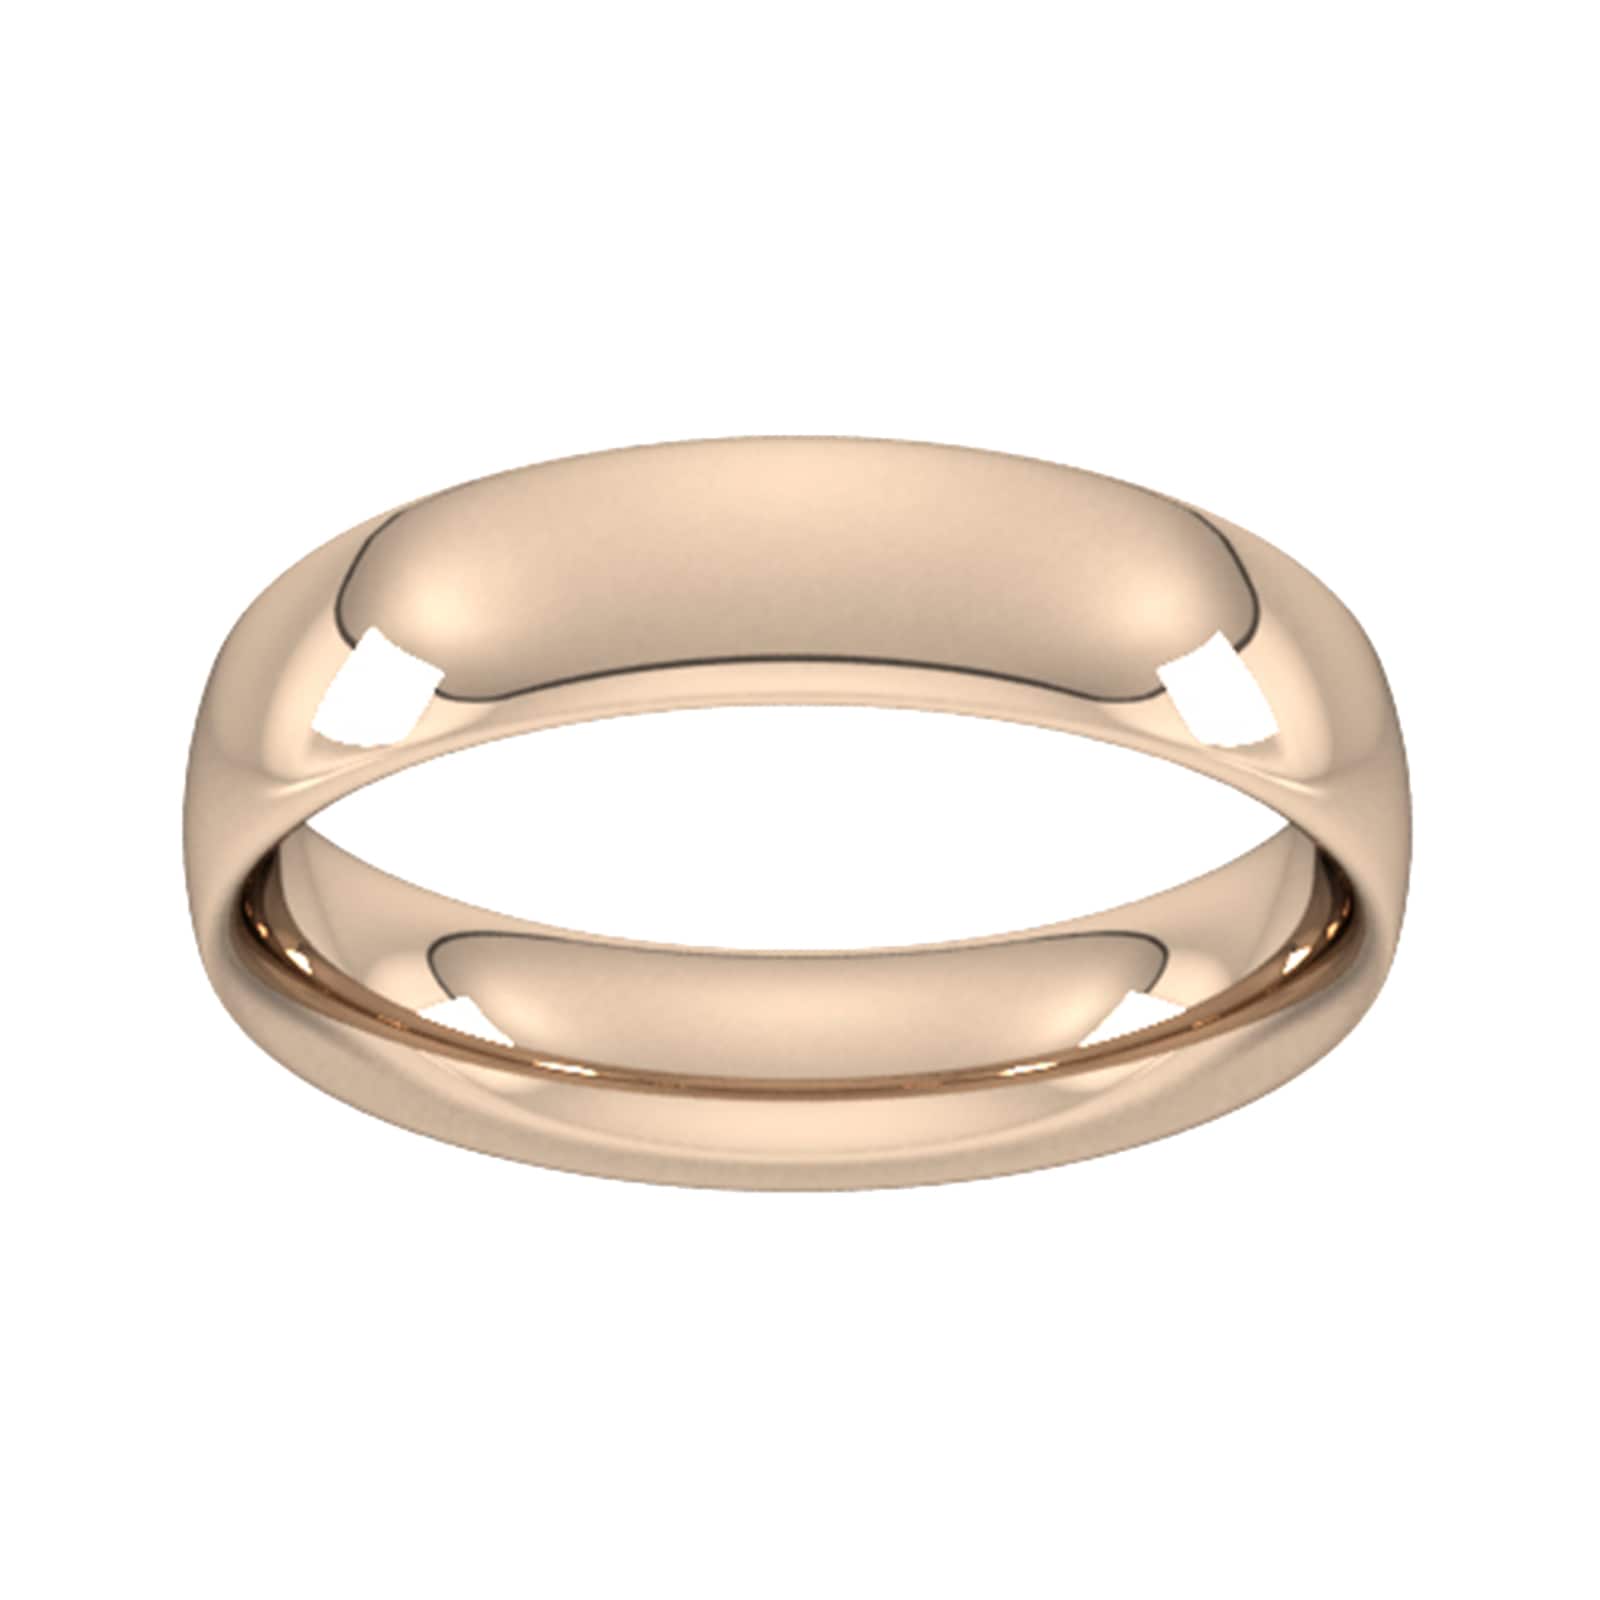 5mm Traditional Court Heavy Wedding Ring In 9 Carat Rose Gold - Ring Size W